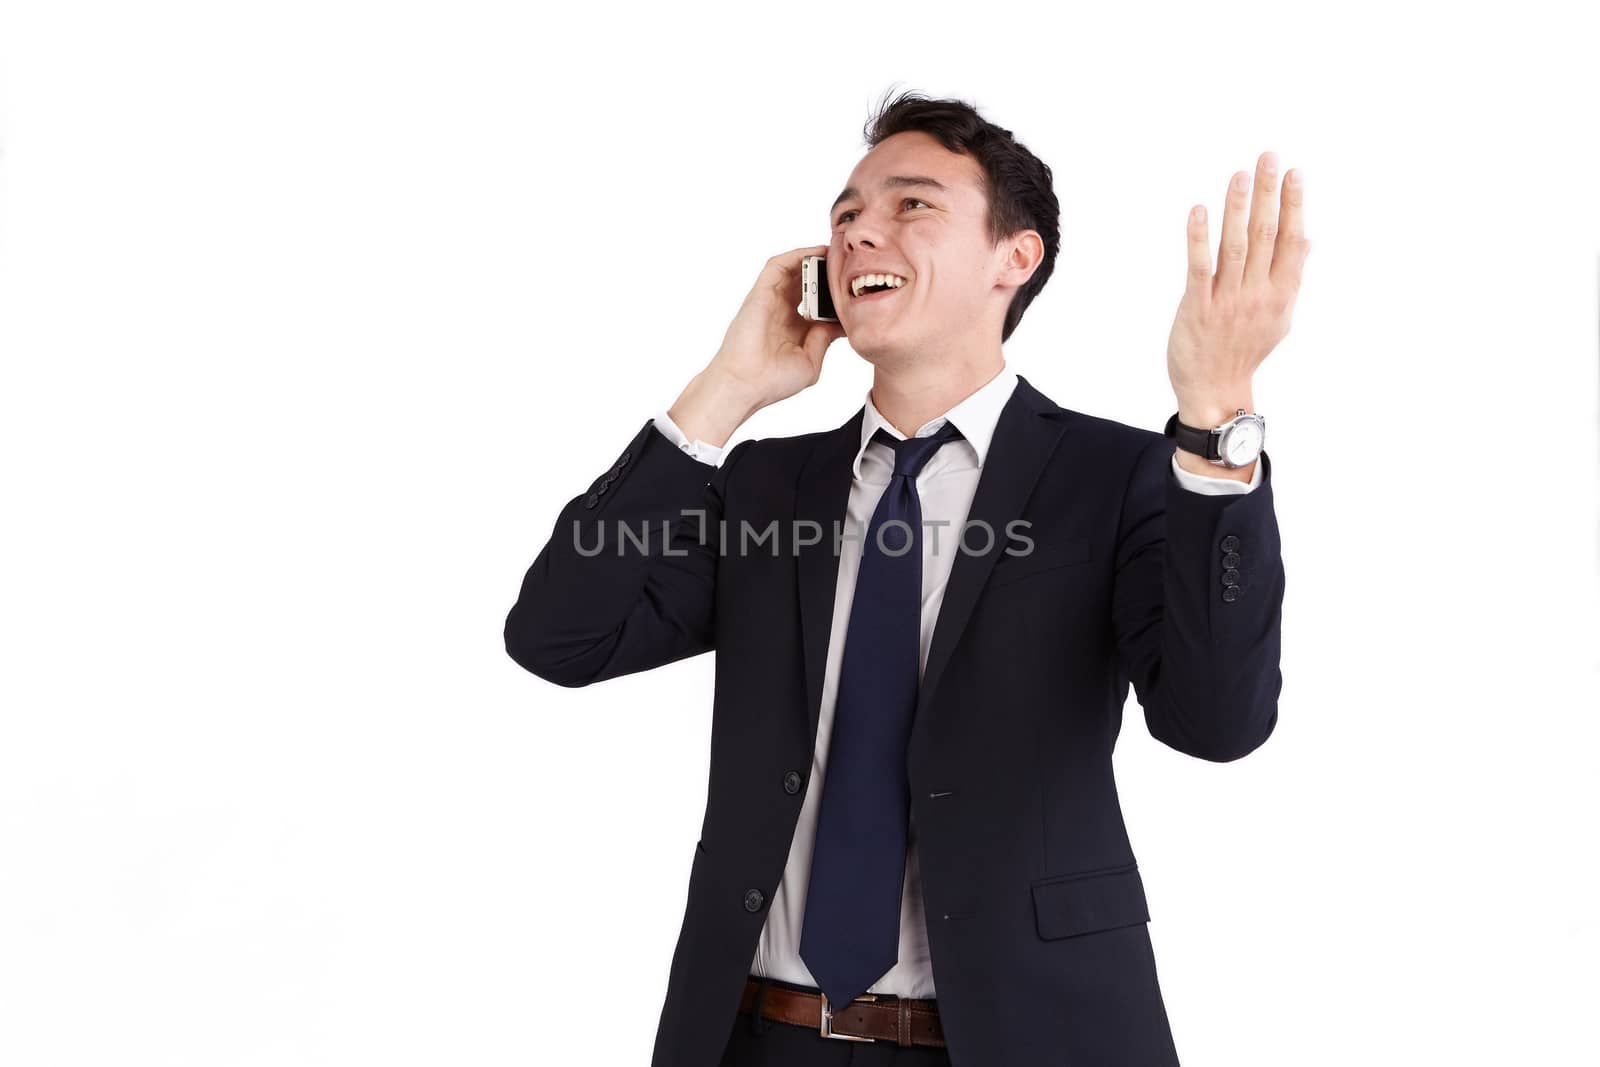 A young caucasian male businessman smiling with raised hand holding a mobile phone looking away from camera.